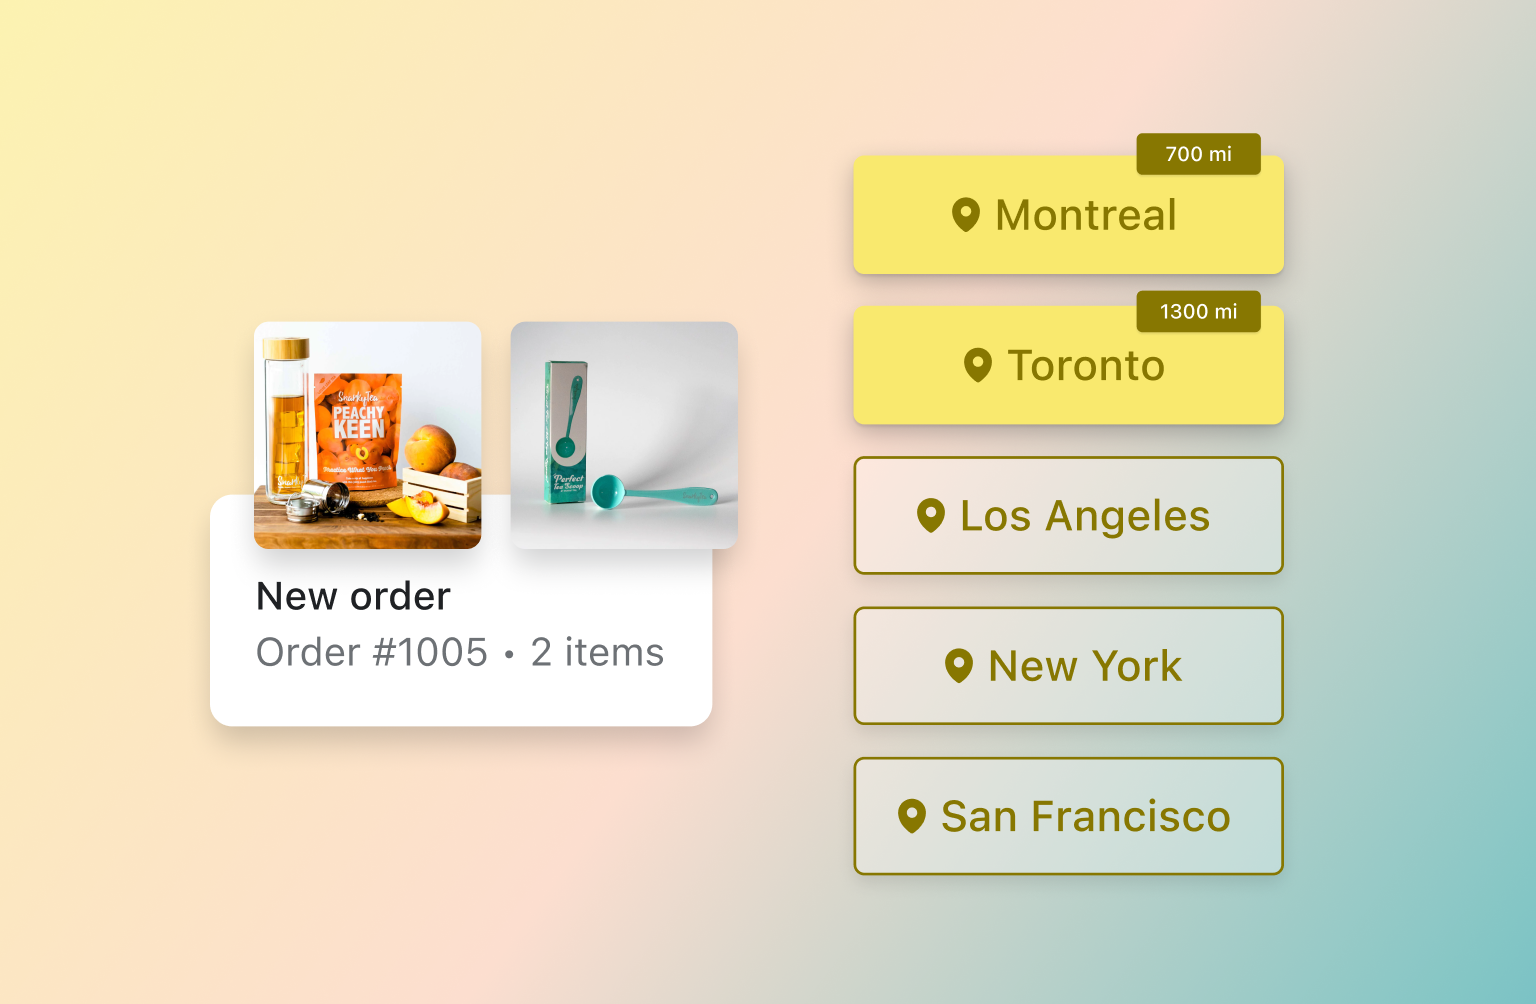 A new order notification with different fulfillment options based on total miles to customer destination